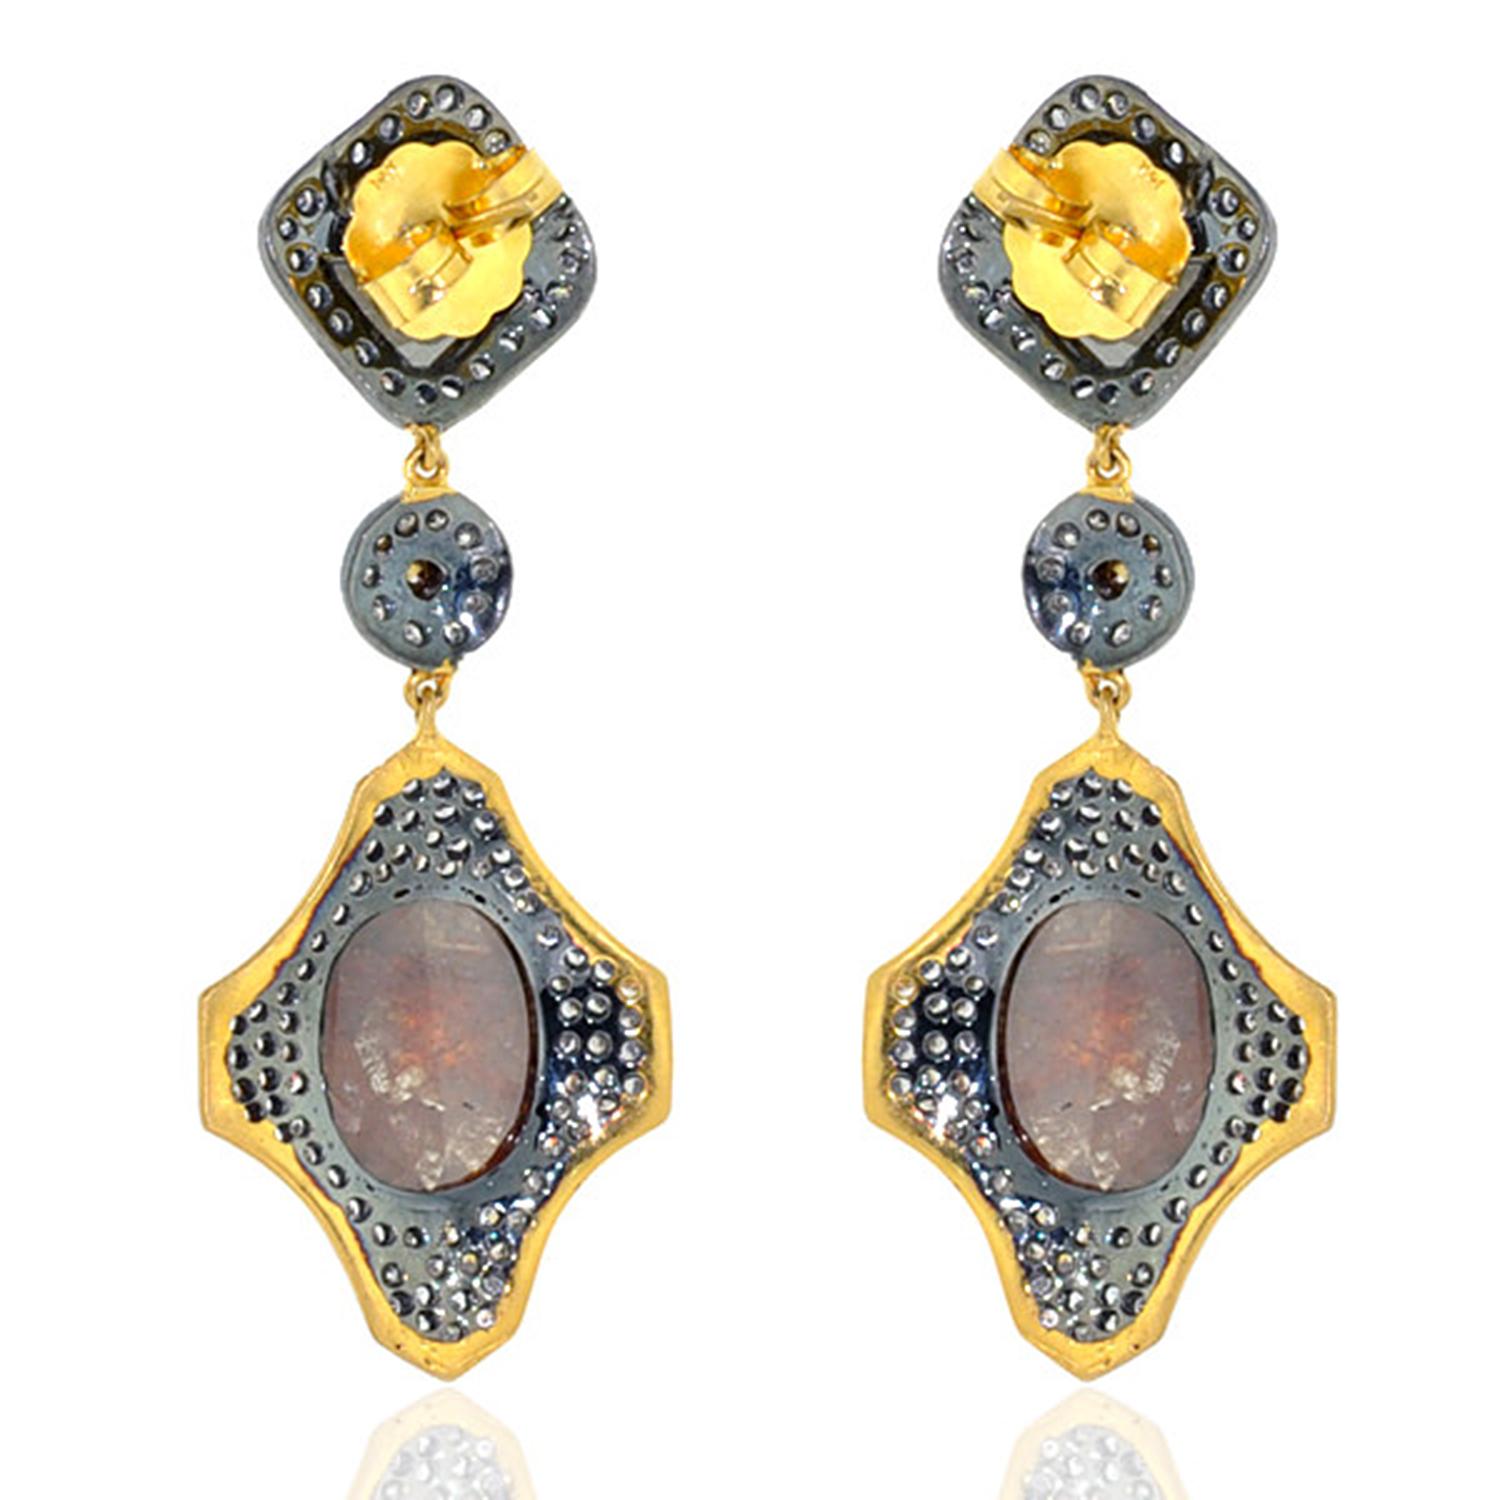 These beautiful earrings are handmade in 18-karat gold and sterling silver.  It is set with 16.38 carats of diamonds. 

FOLLOW  MEGHNA JEWELS storefront to view the latest collection & exclusive pieces.  Meghna Jewels is proudly rated as a Top